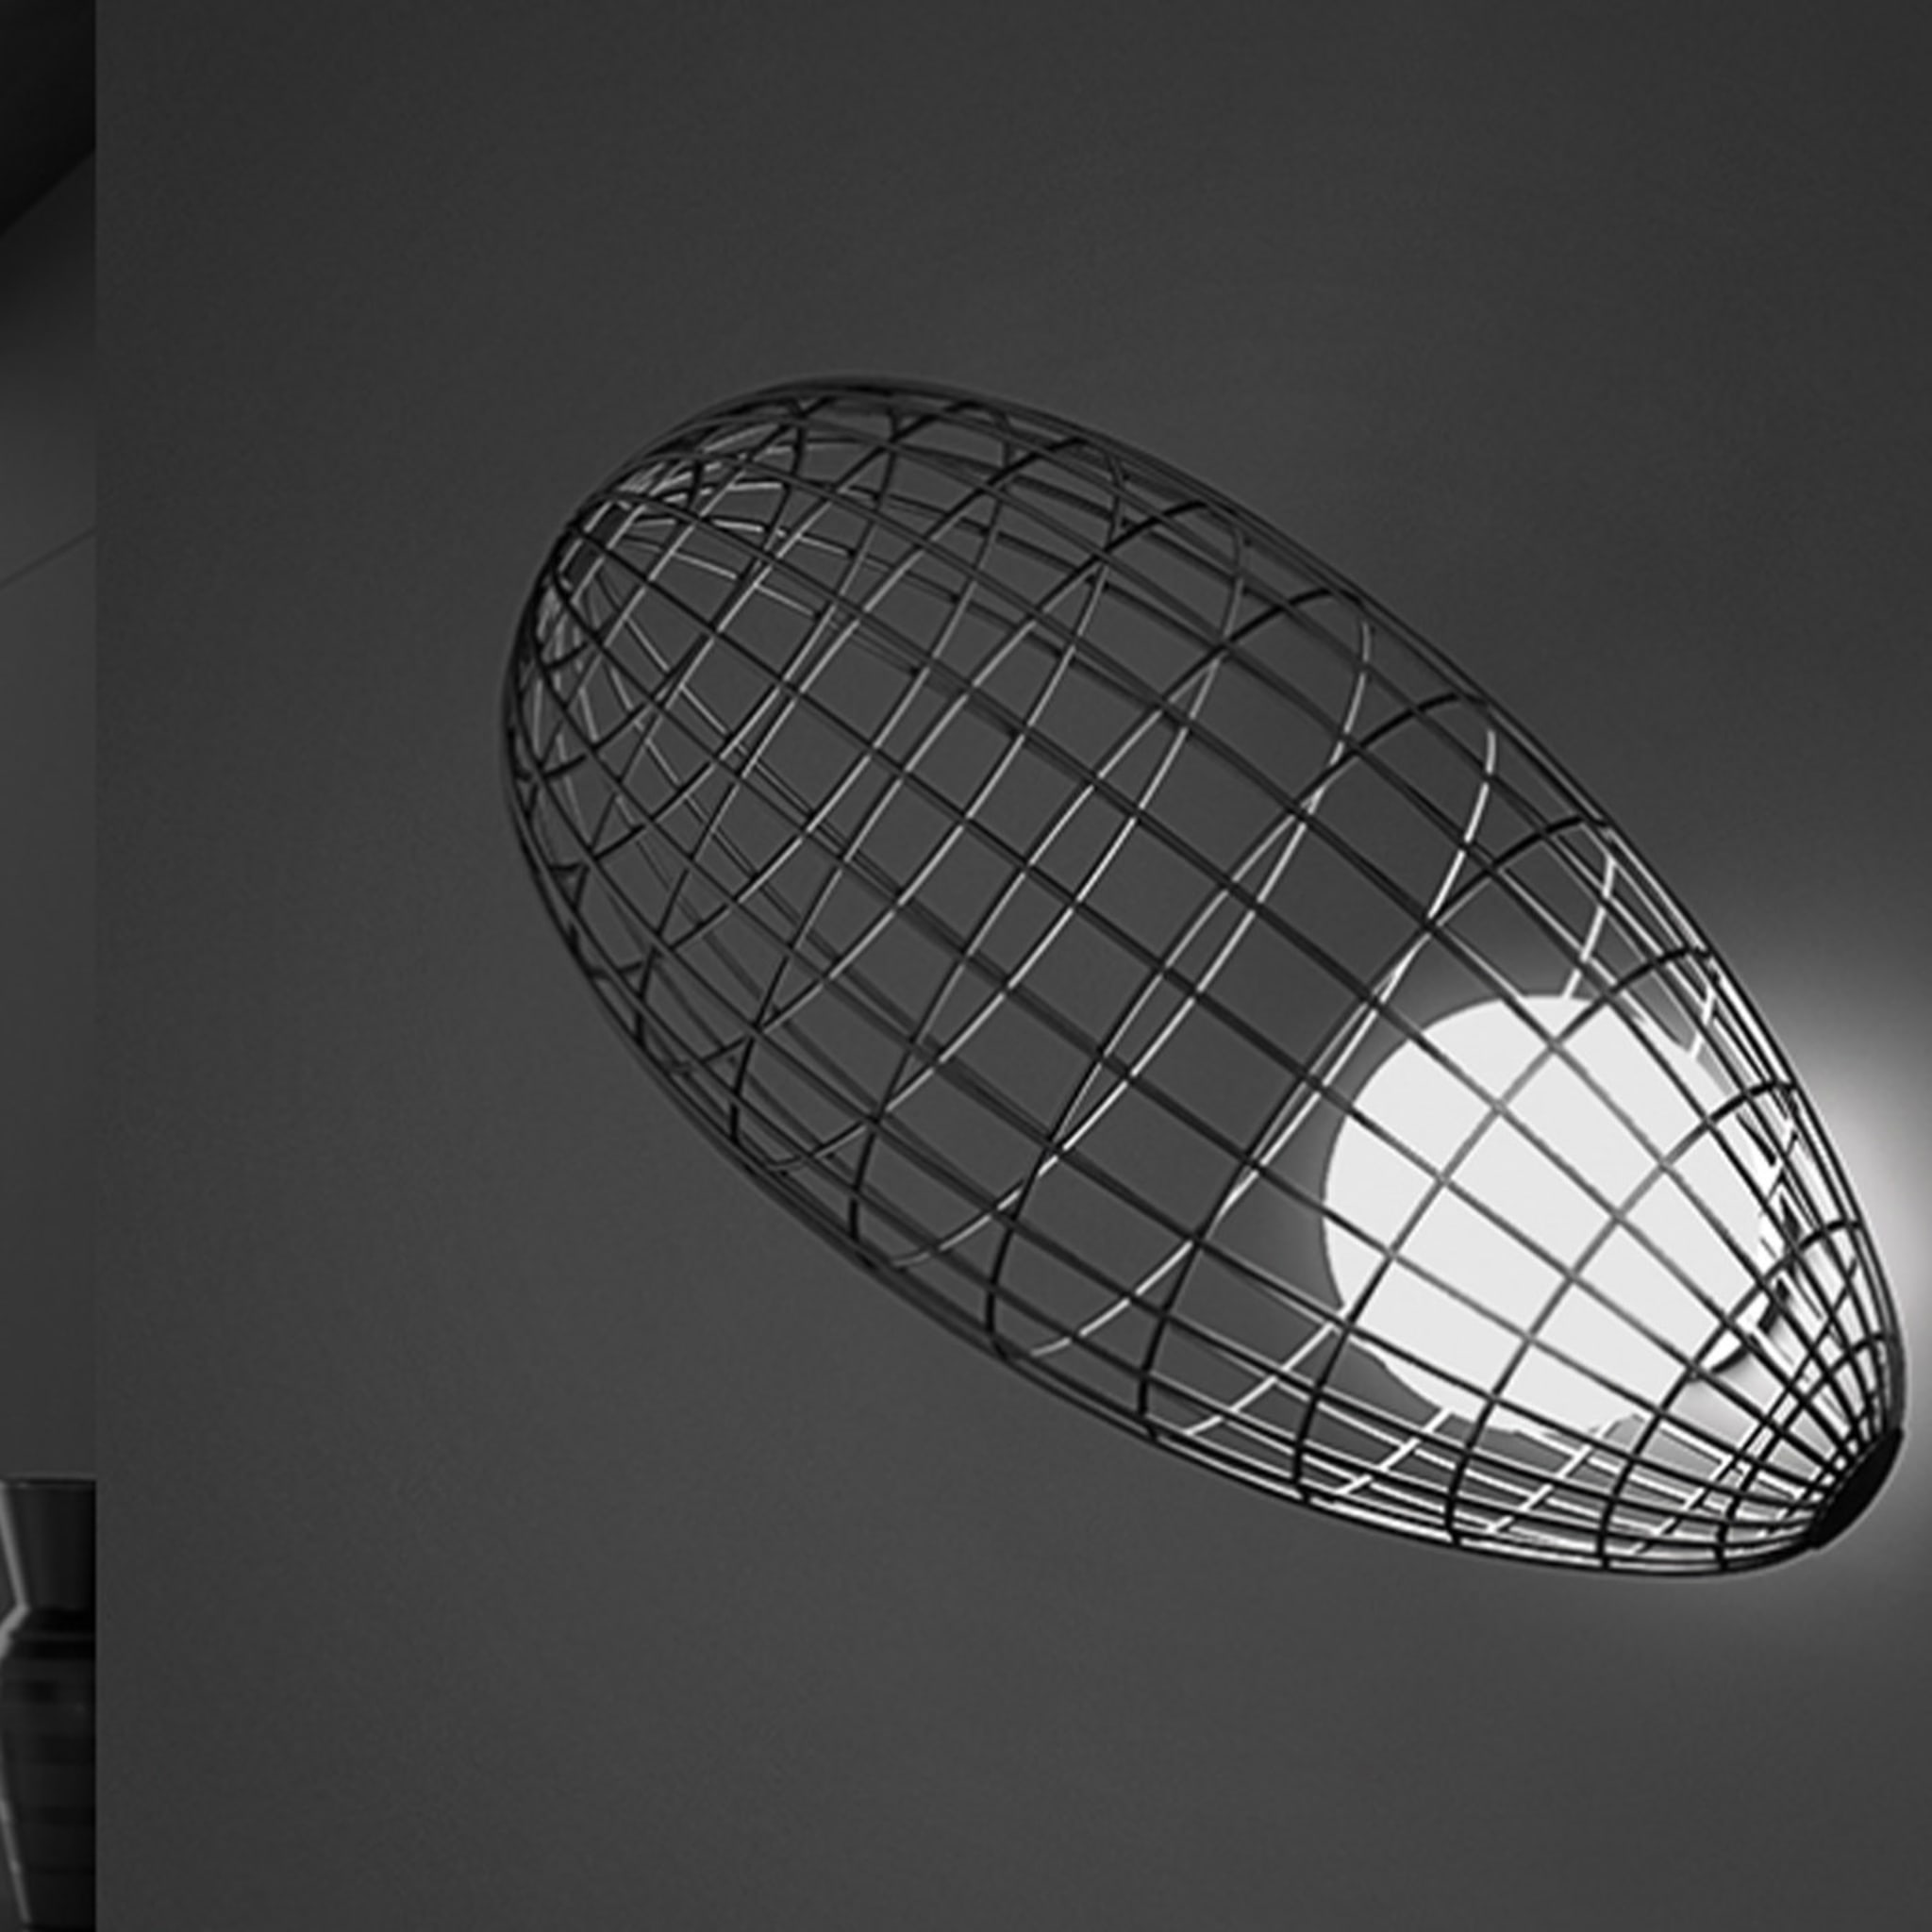 Norge Wall Lamp by MAM Design - Alternative view 1